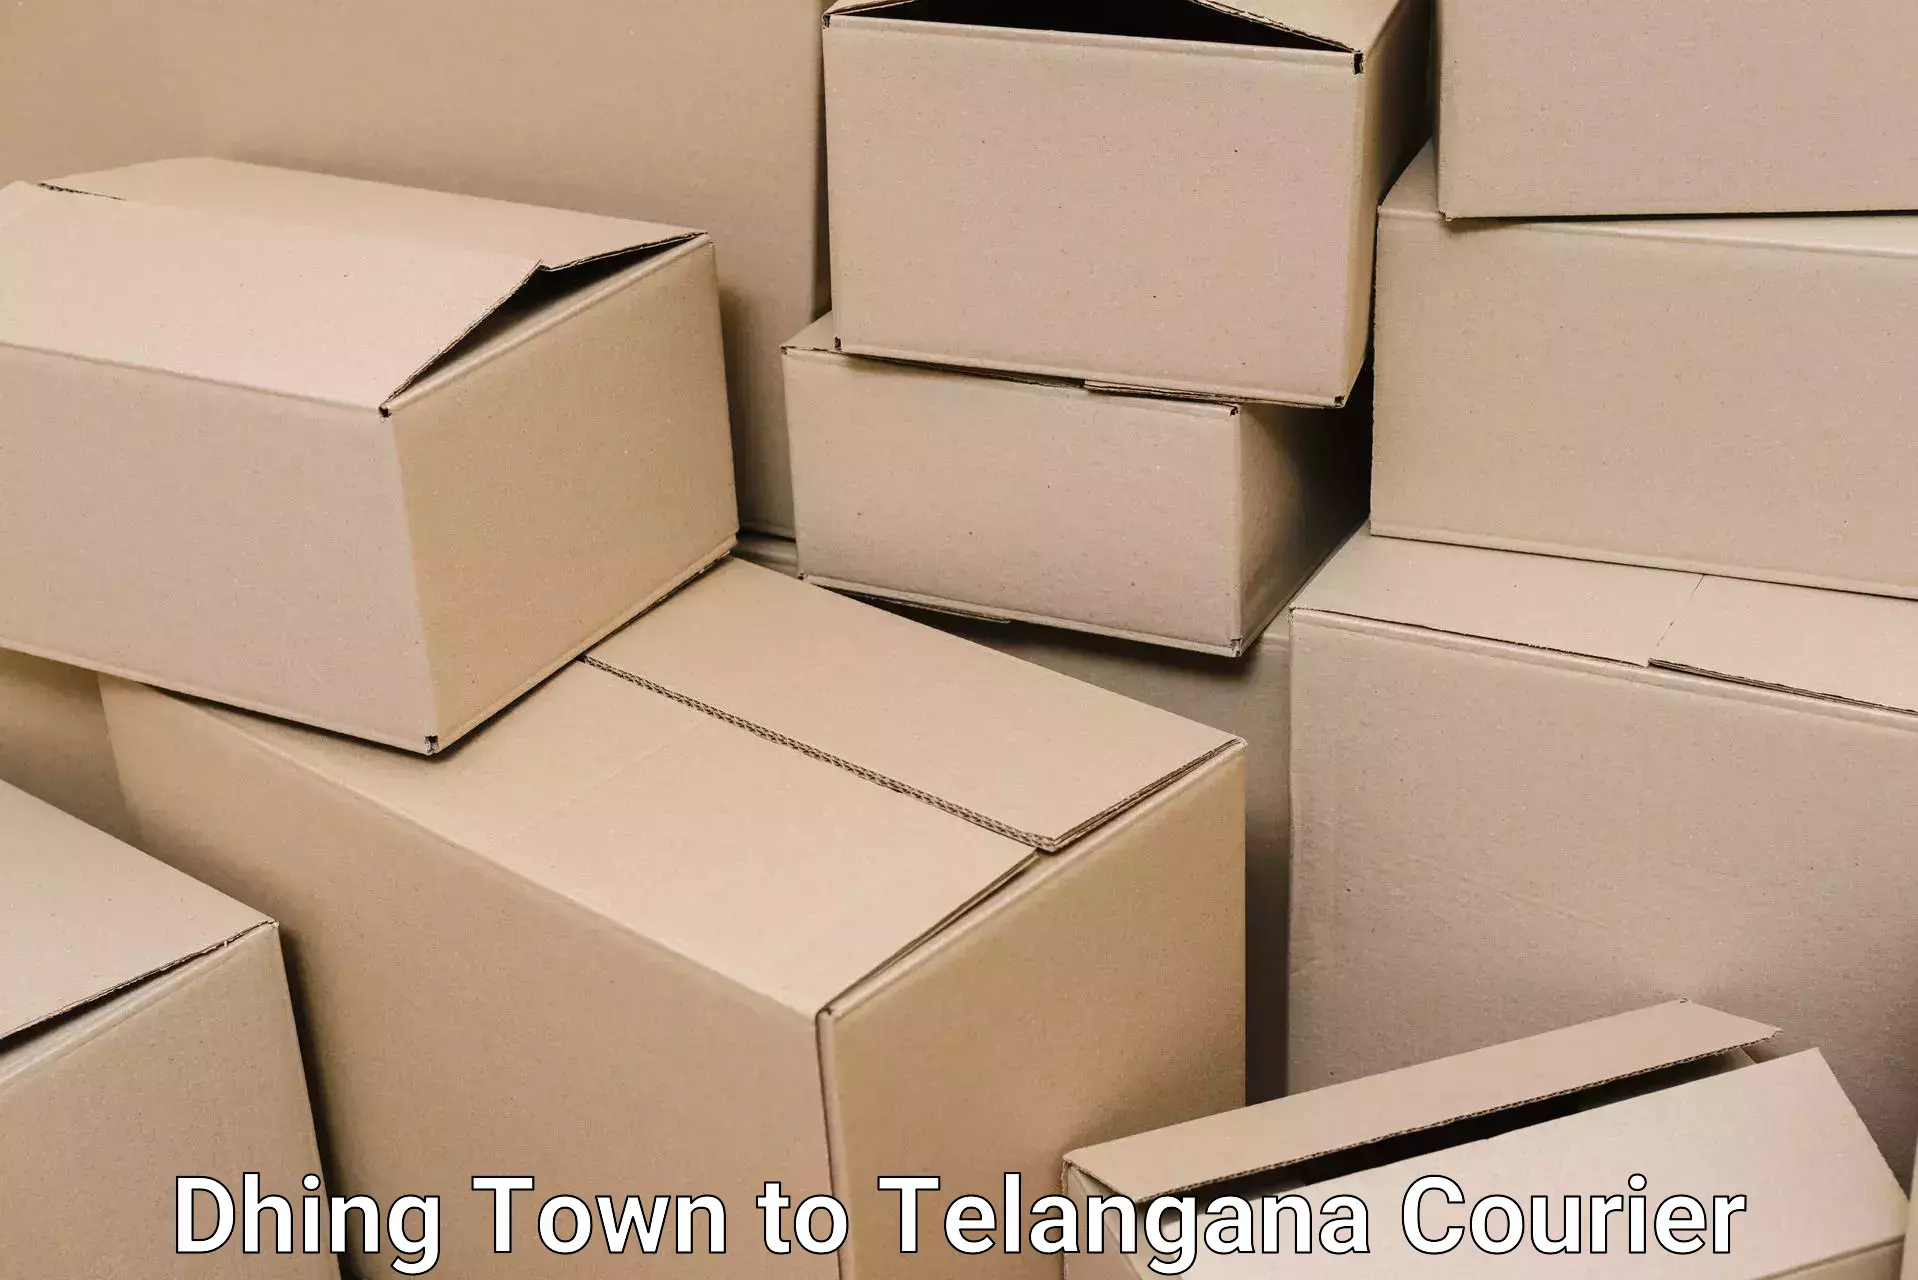 Furniture delivery service Dhing Town to Vikarabad